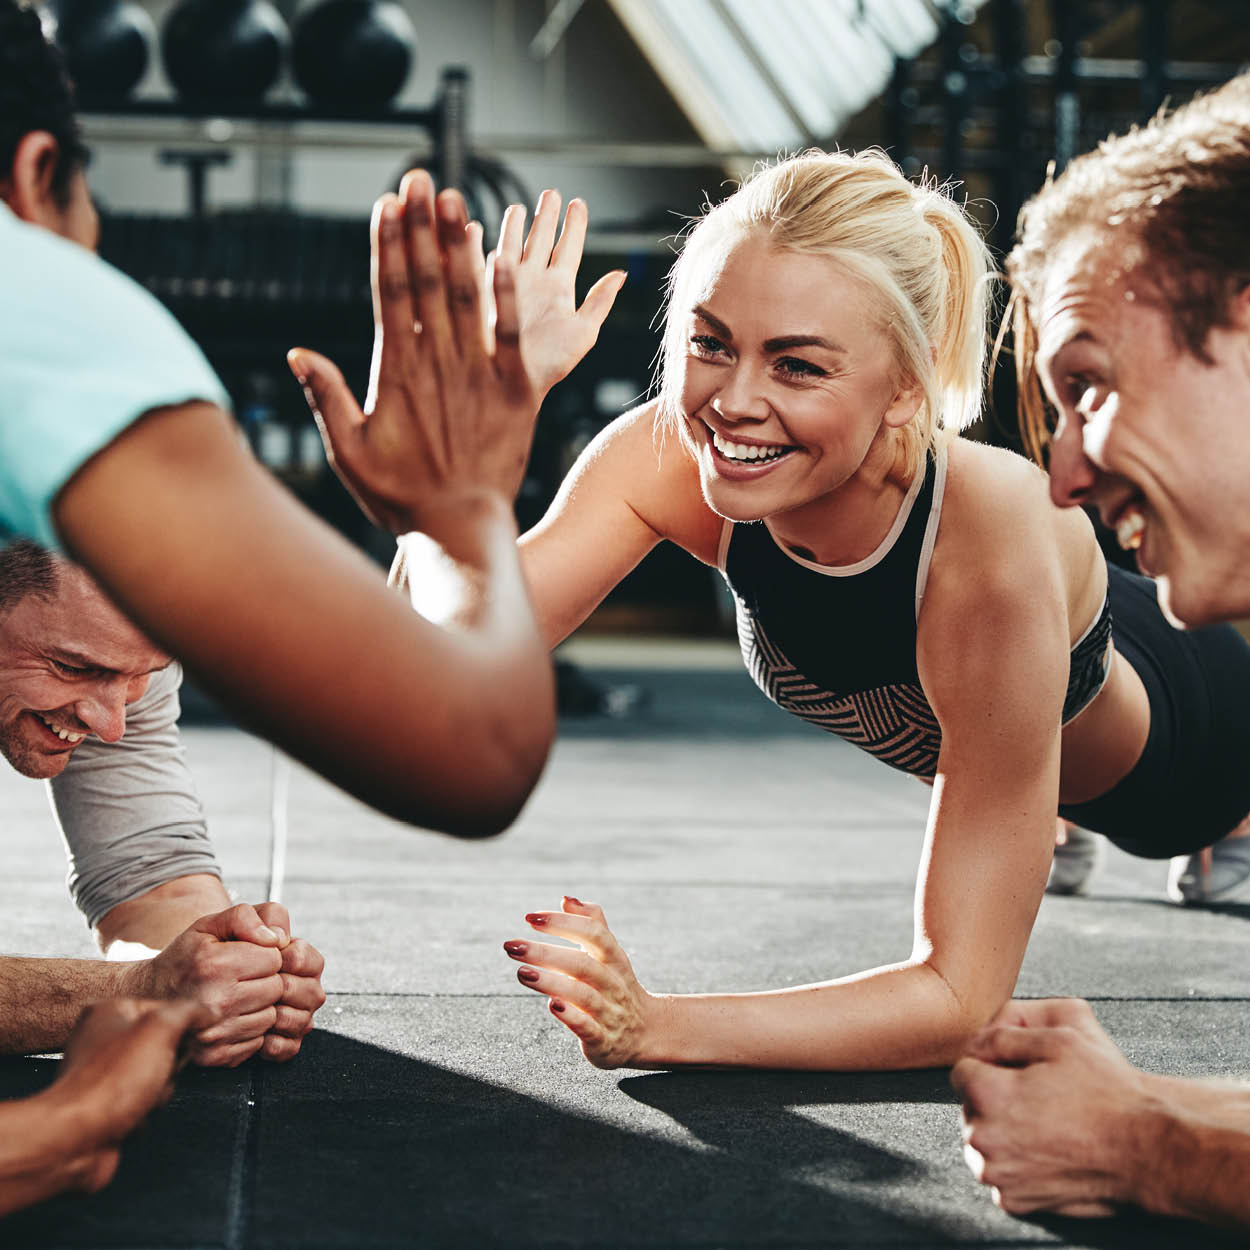 woman and men exercising, health coaching,  happy about accomplishment and giving high five